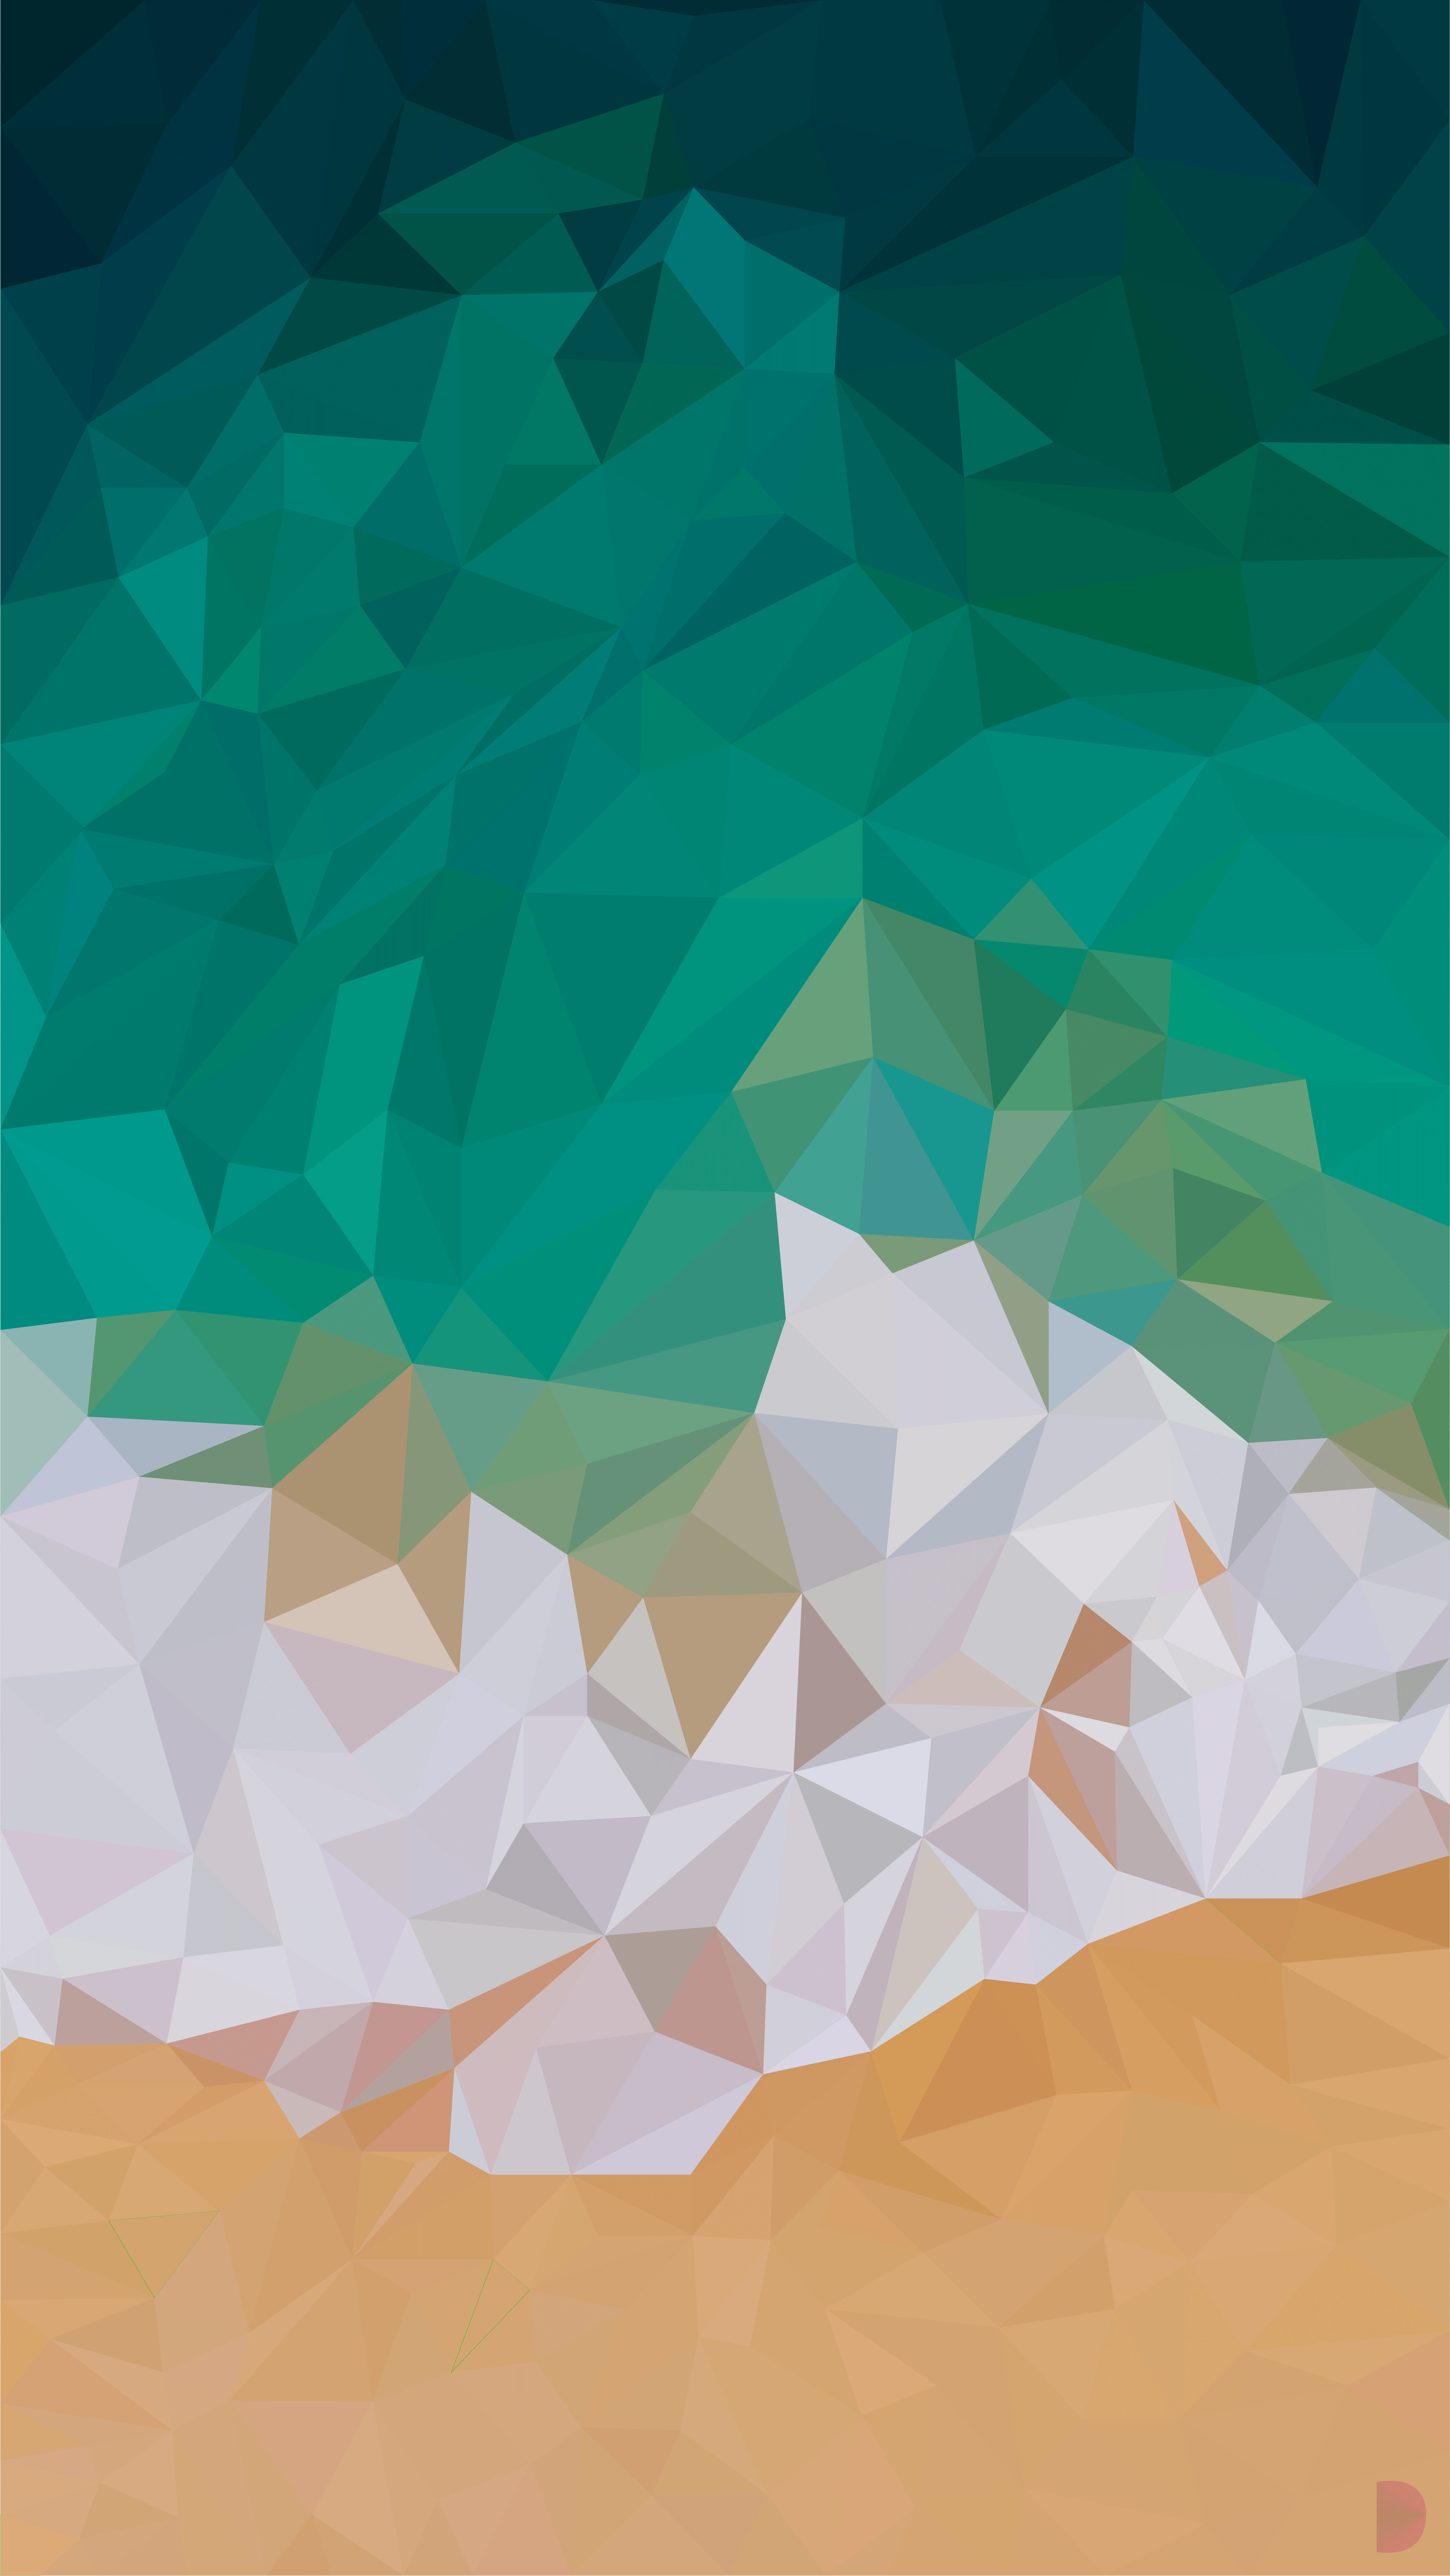 iPhone Wave wallpaper in low poly